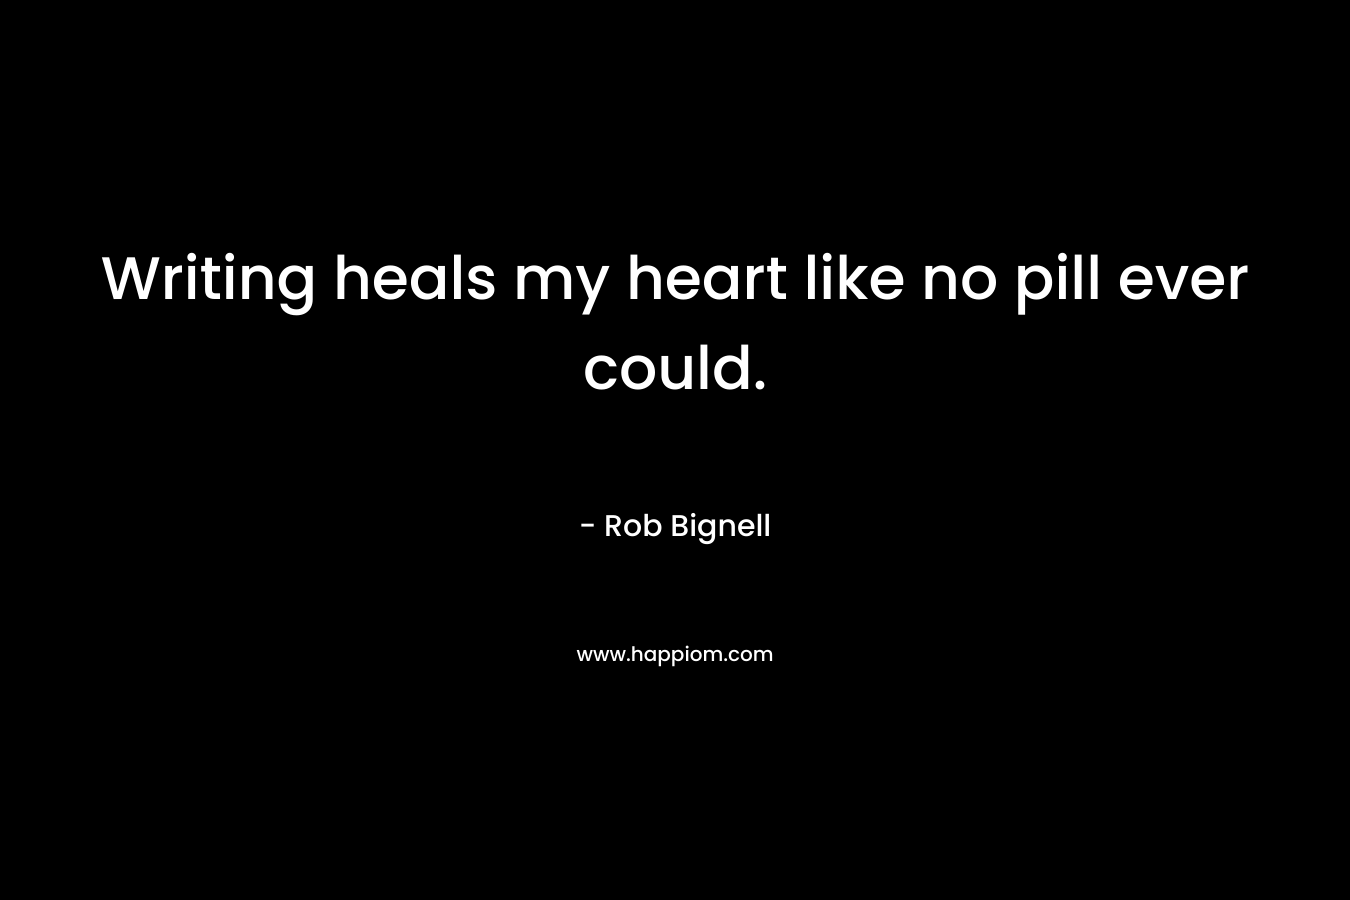 Writing heals my heart like no pill ever could. – Rob Bignell